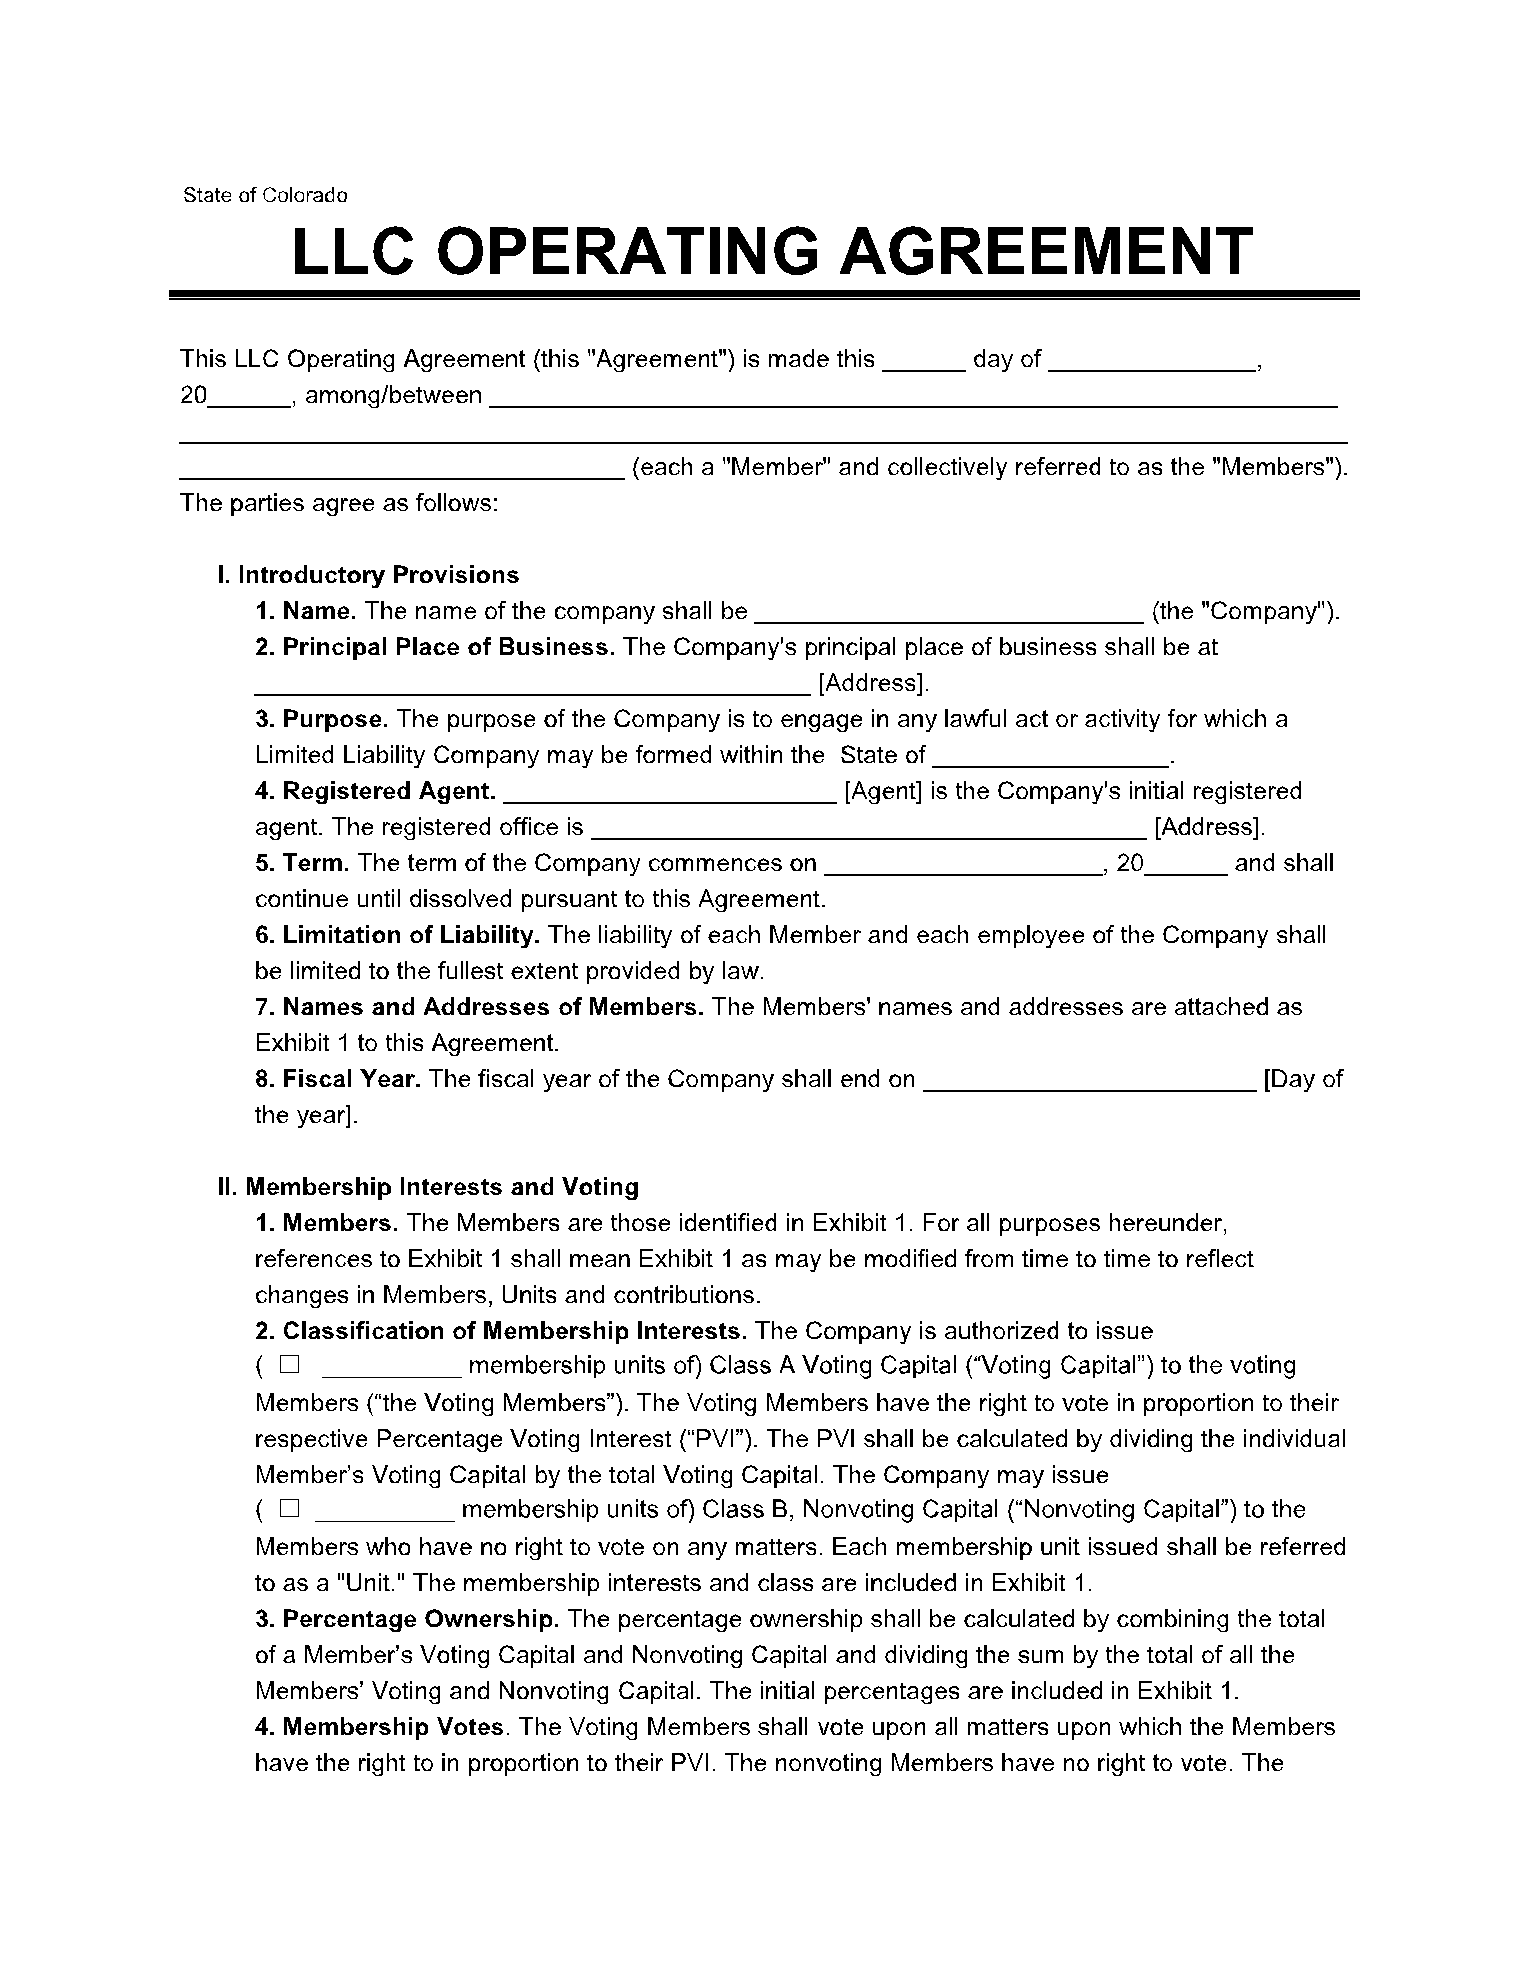 Operating Agreement for LLC Colorado